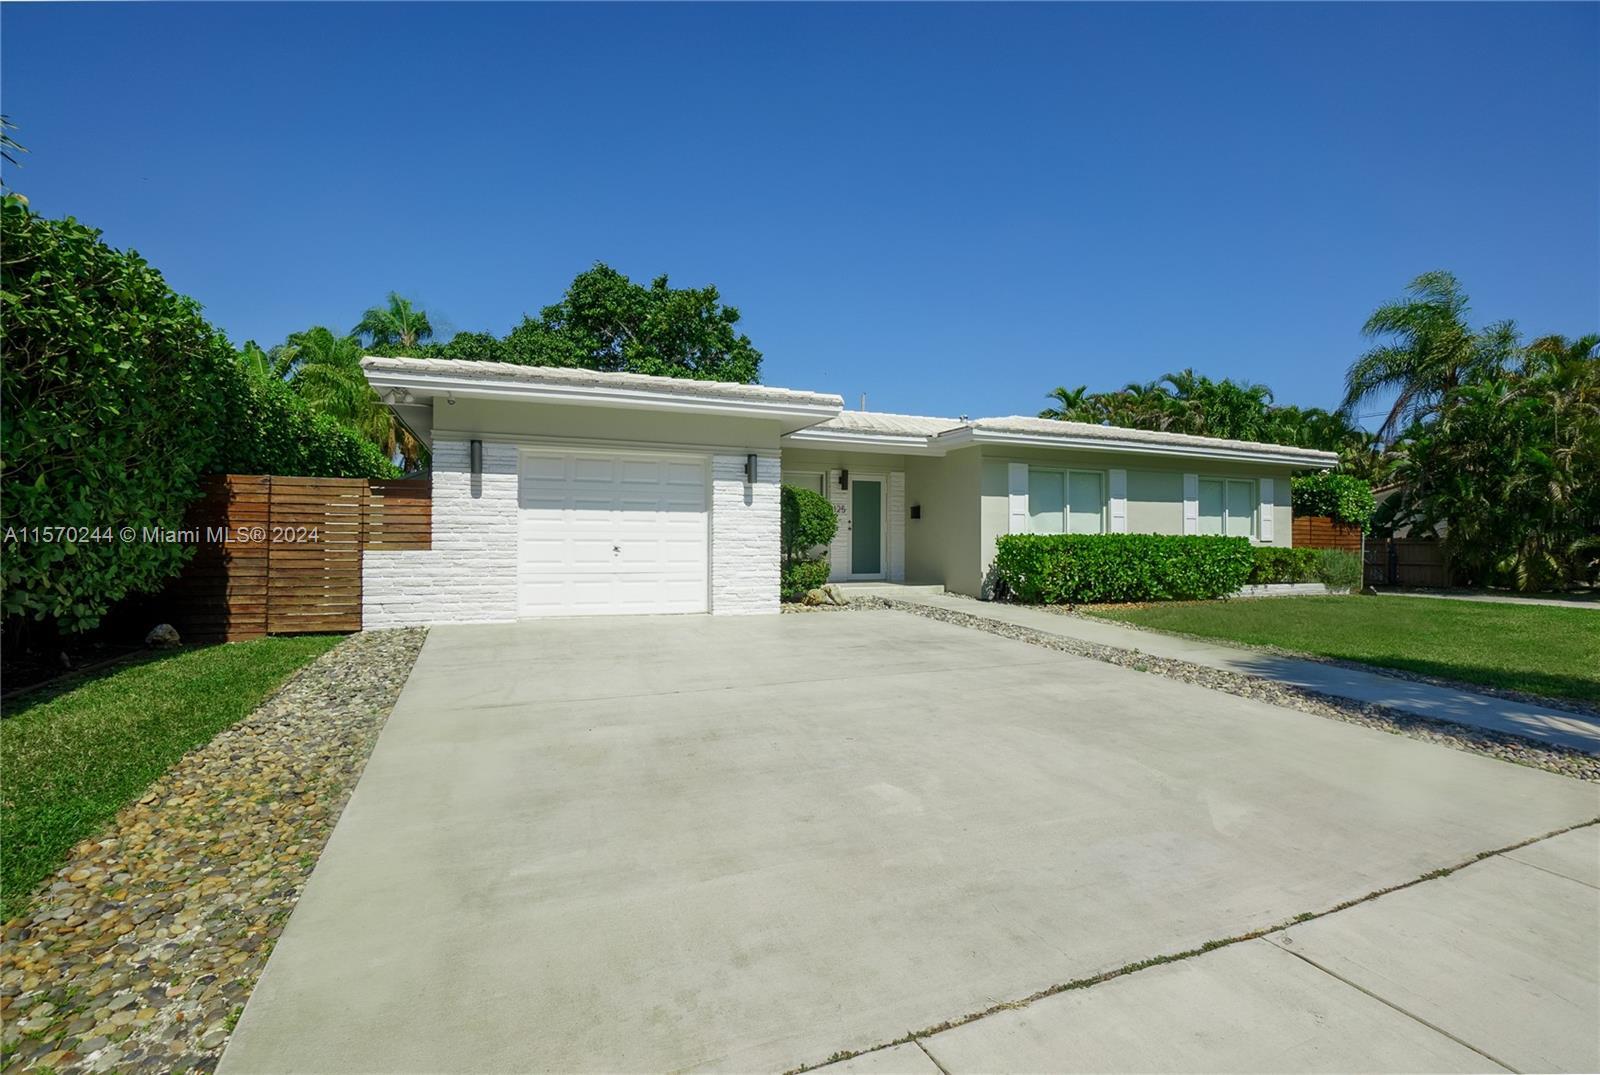 Photo of 125 NW 95th St in Miami Shores, FL